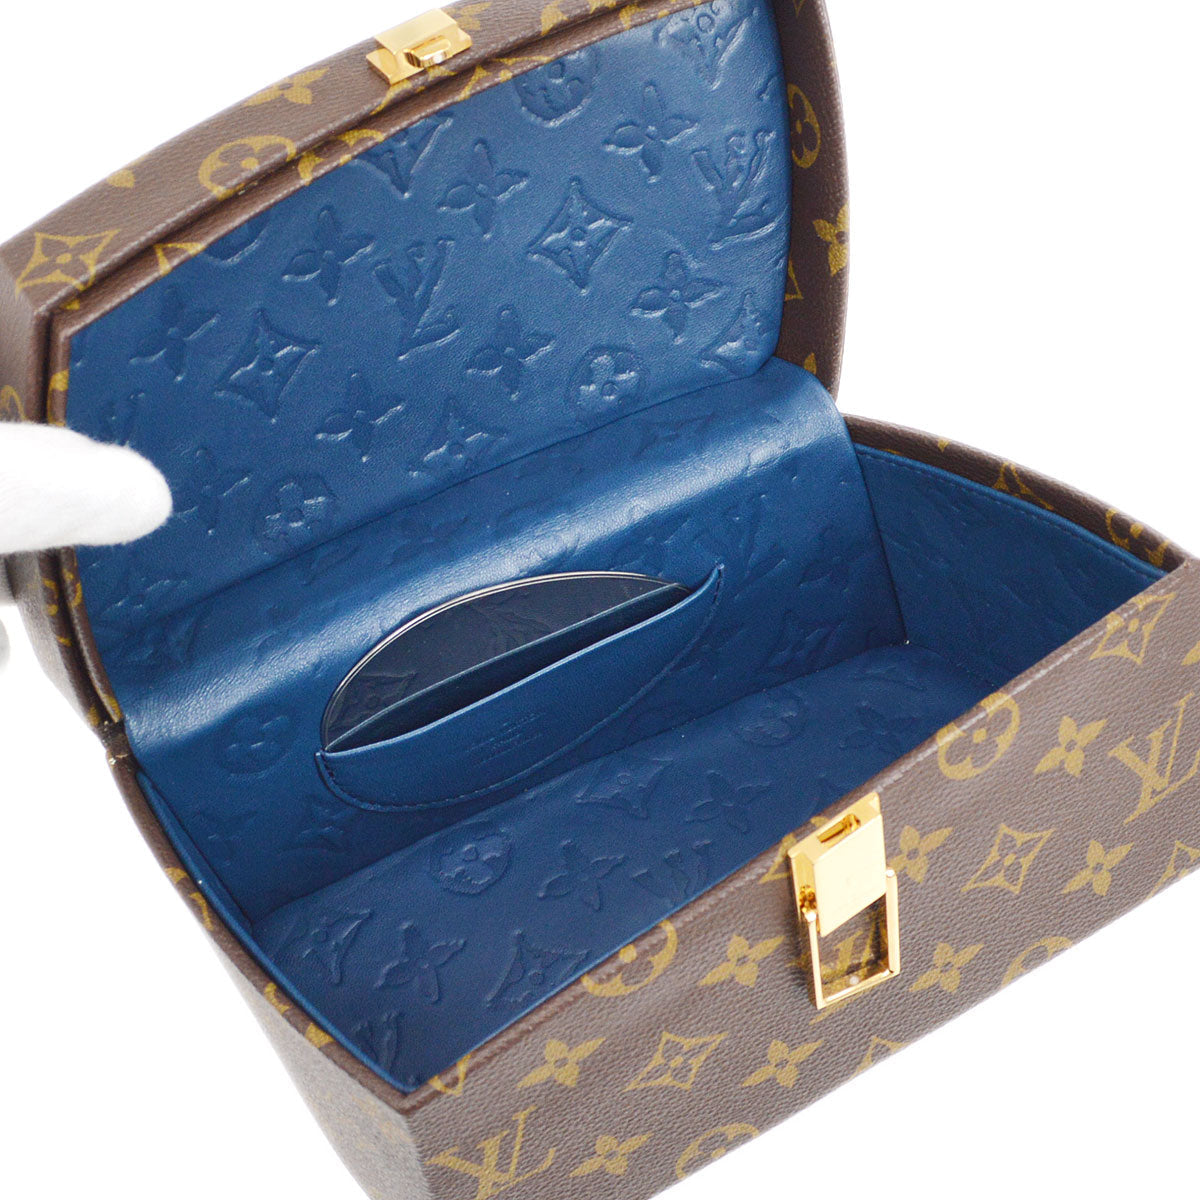 Louis Vuitton Monogram Frank Gehry Twisted Box - Brown Handle Bags